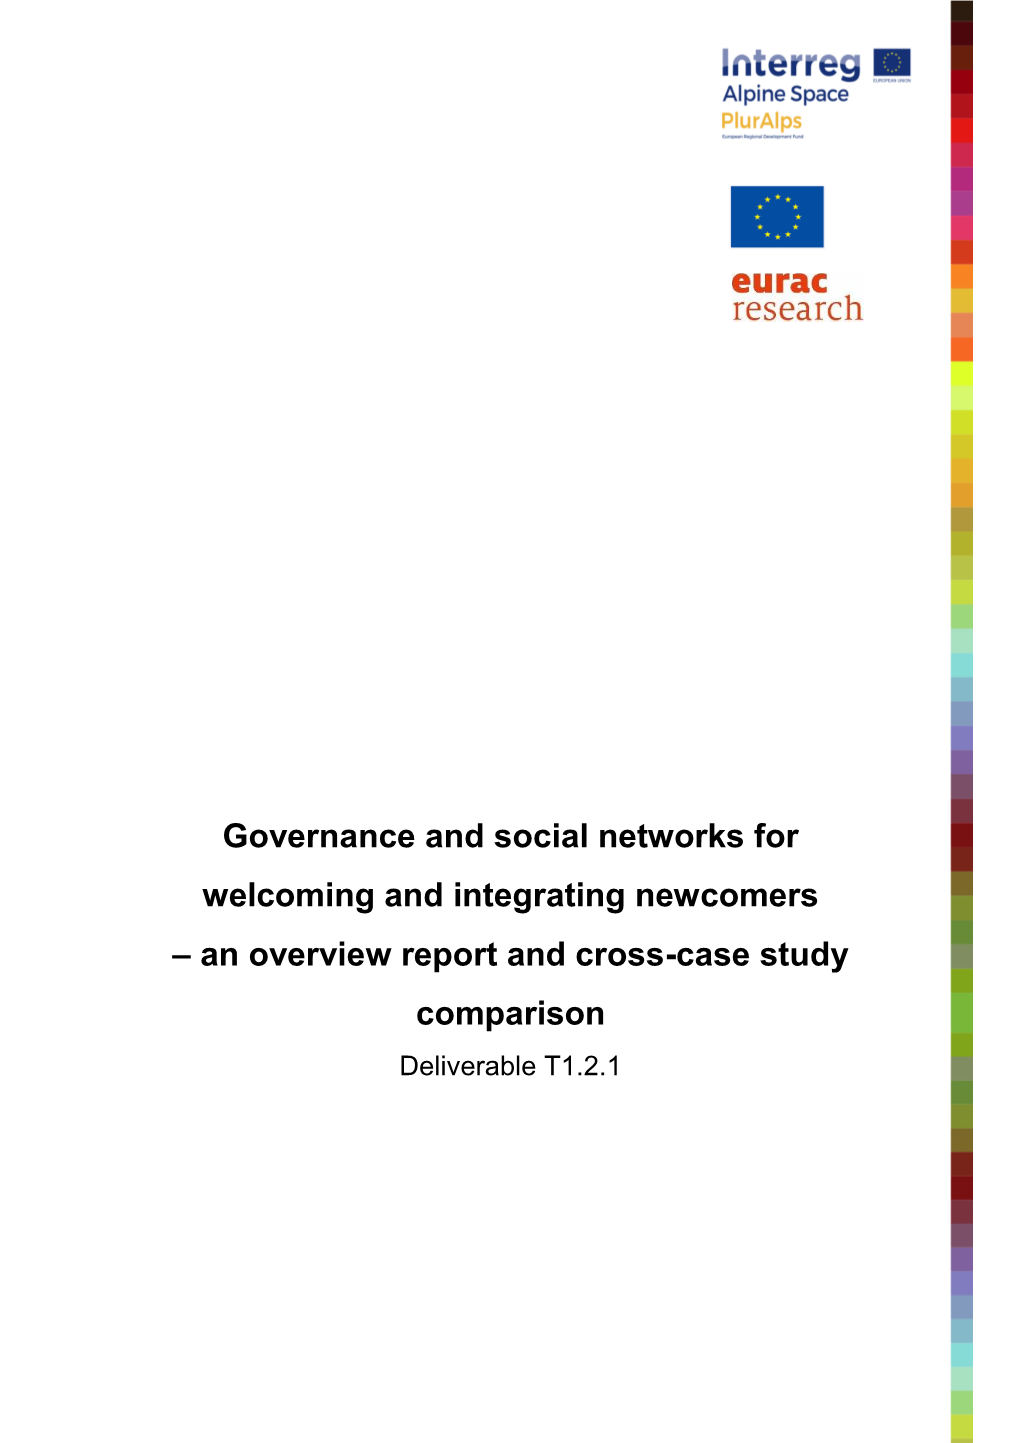 Report on Governance and Social Networks for Welcoming And